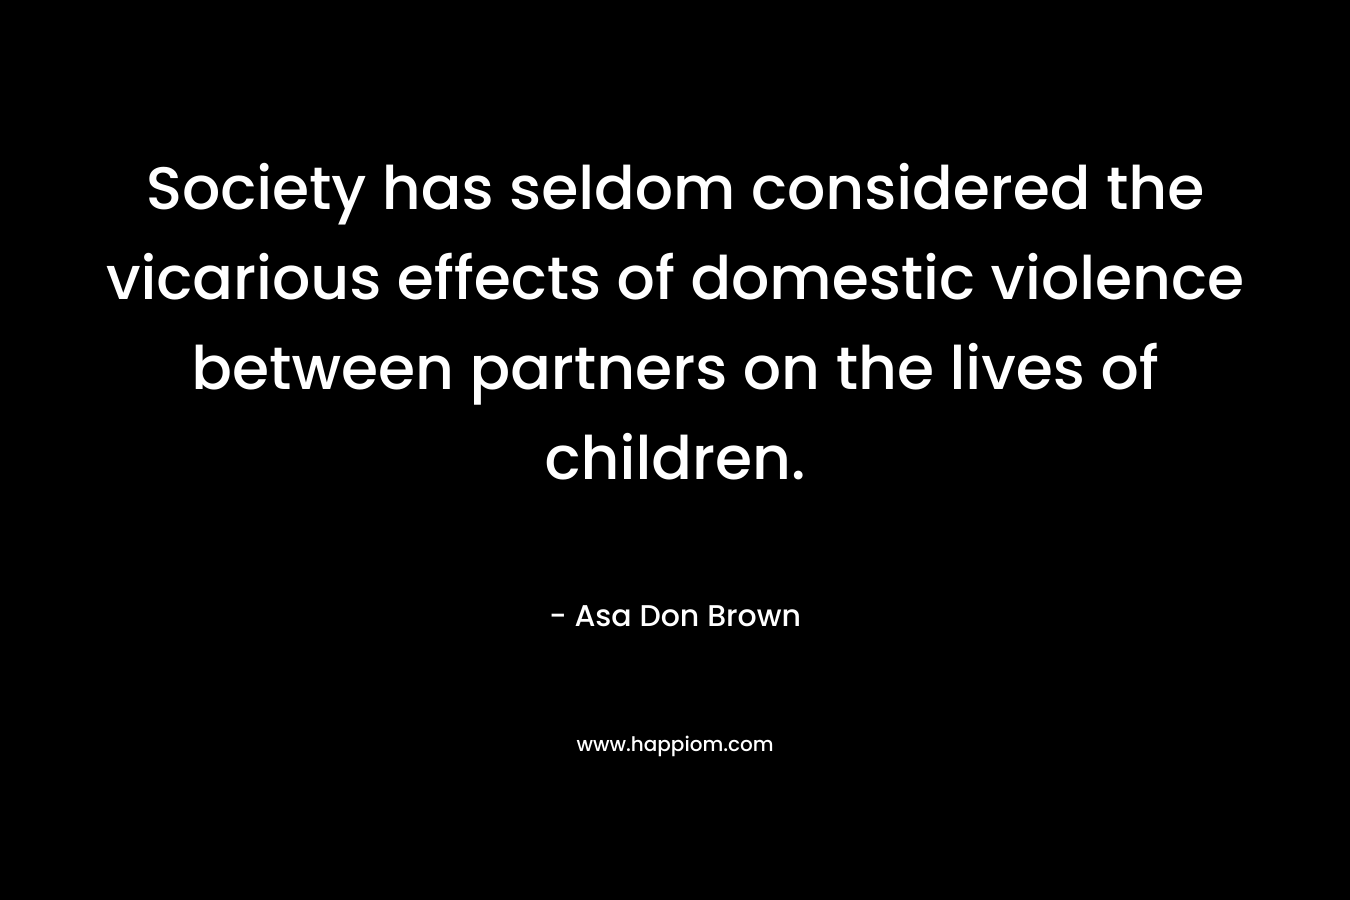 Society has seldom considered the vicarious effects of domestic violence between partners on the lives of children. – Asa Don Brown